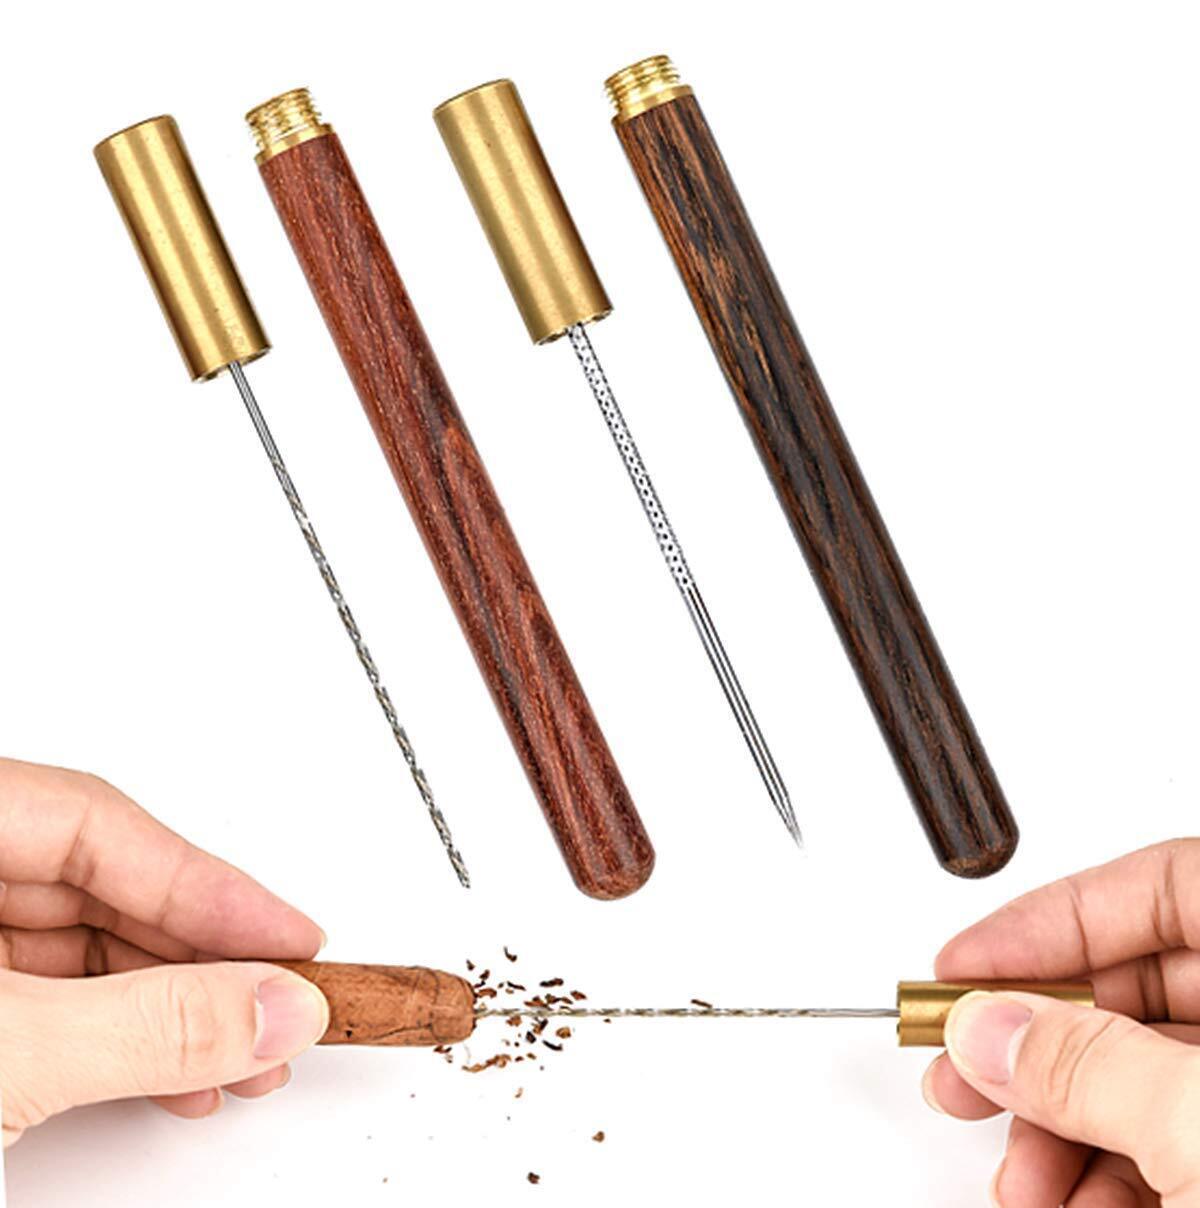 【2-Pcs】Cigar Draw Enhancer Tool & Nubber, Sangle Sopffy Cigar Draw with Woode...